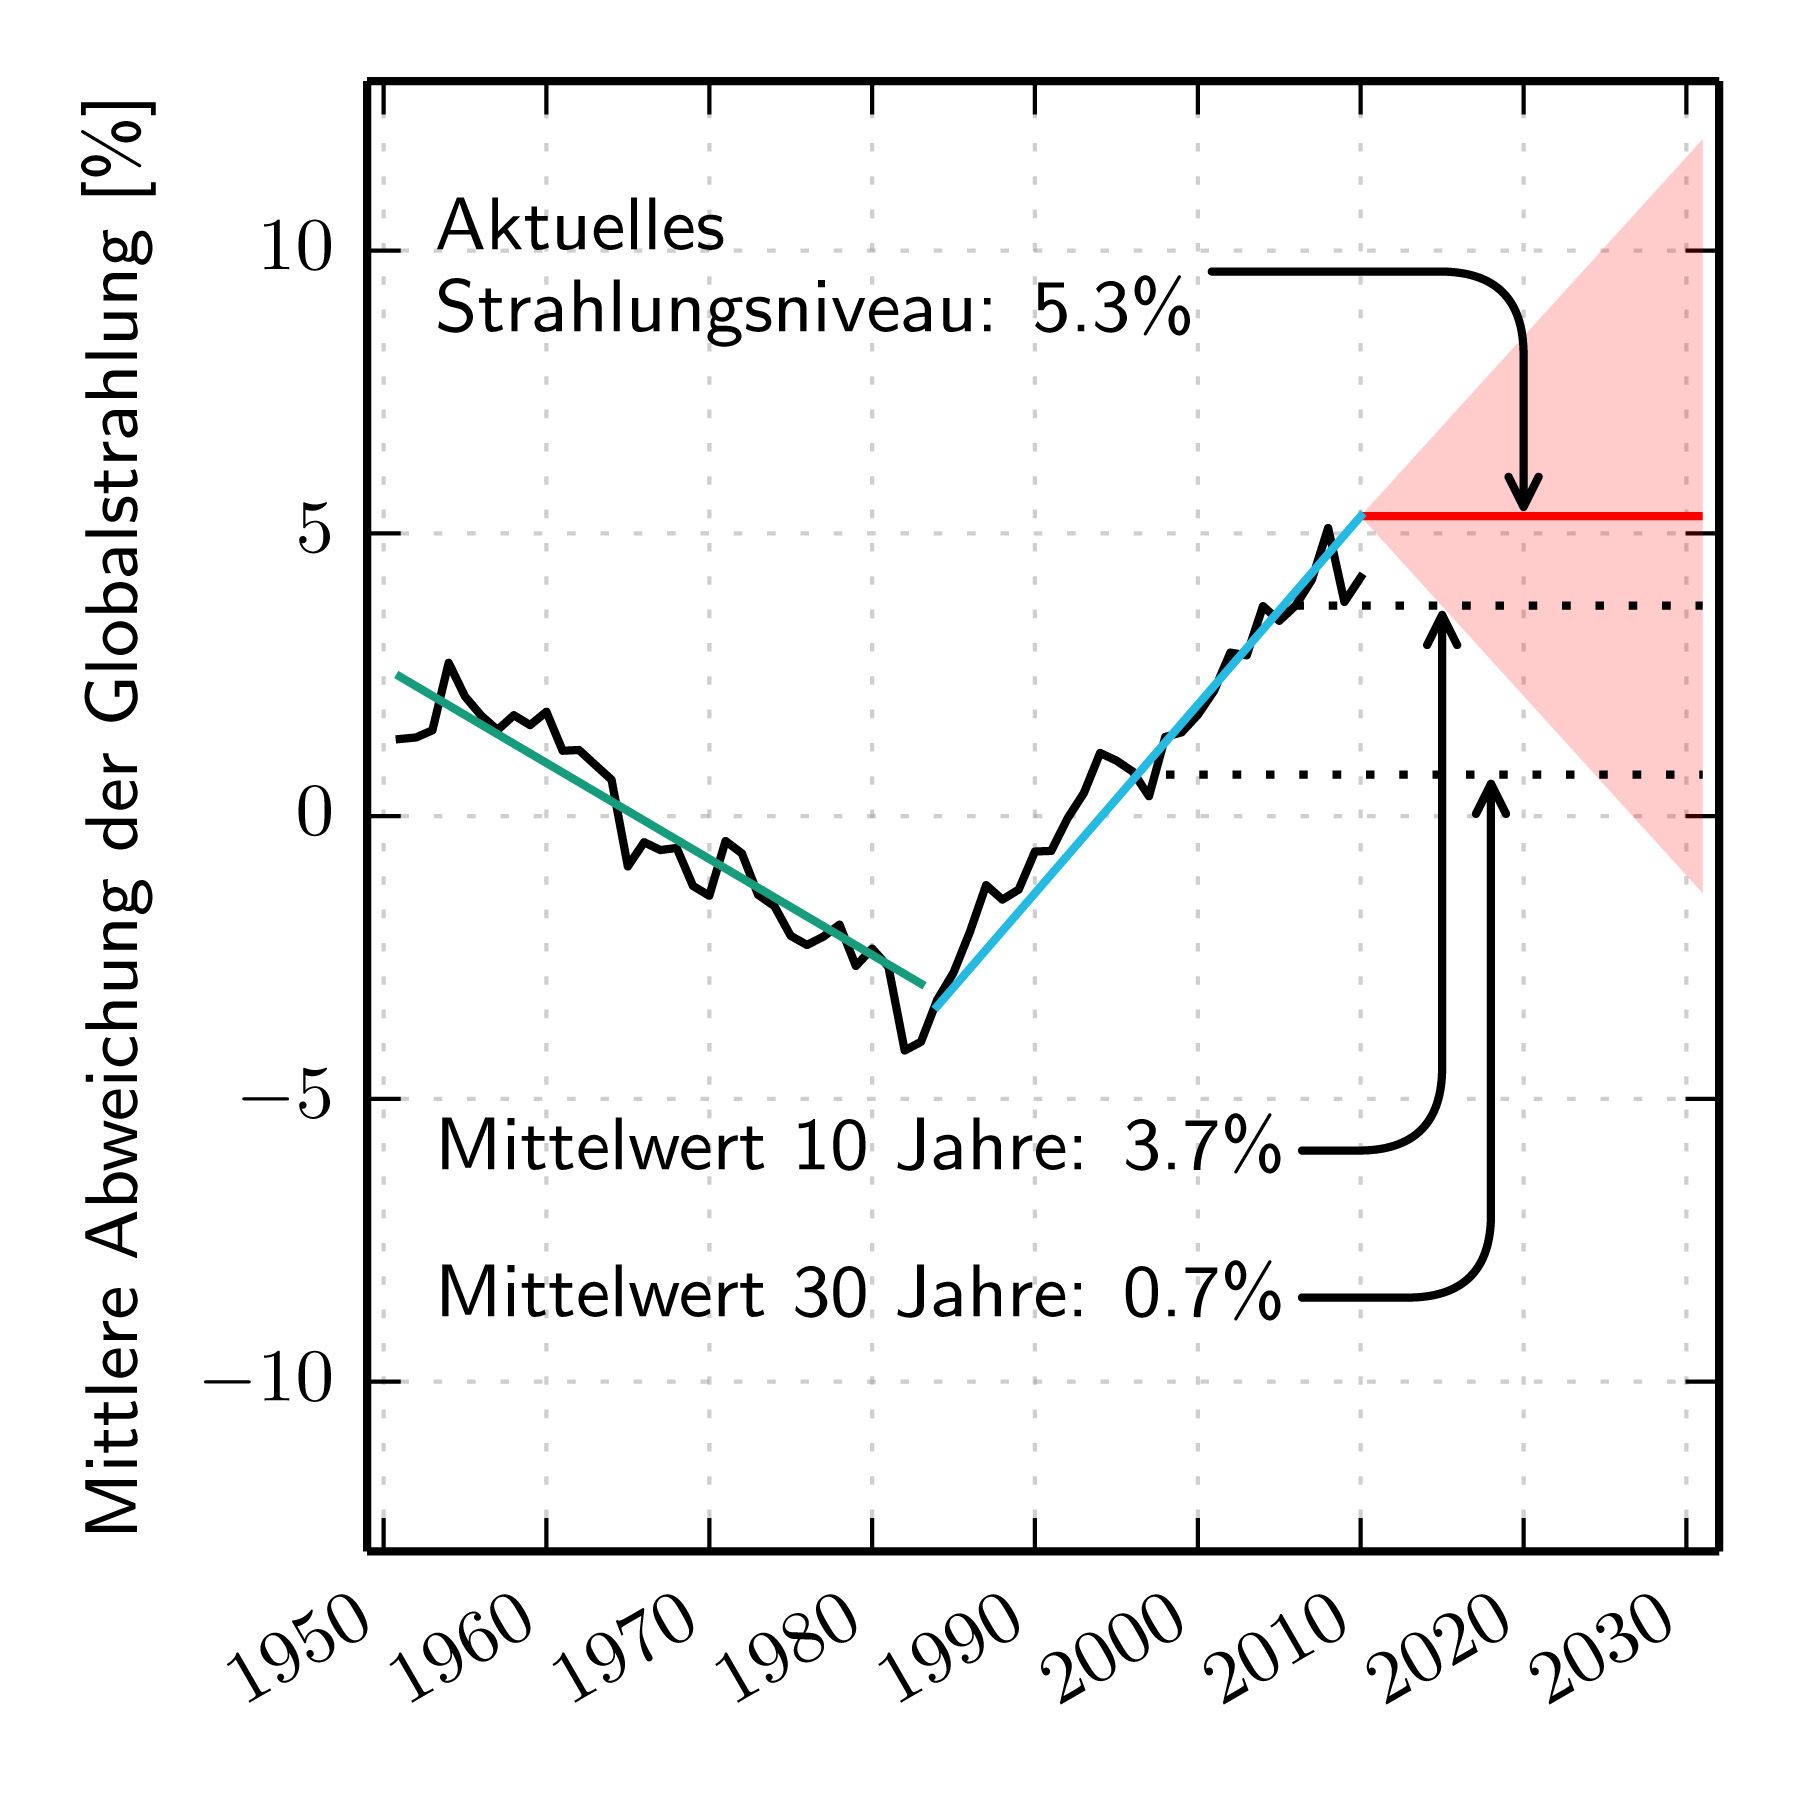 Annual deviations in solar radiation from the average value in Germany between 1951-2010 (moving average: black line). Linear trend of the dimming and brightening phase: green/blue line. The 30-year average value is lower than the current level of radiation. The 10-year average value is only slightly lower than the current level of radiation. 